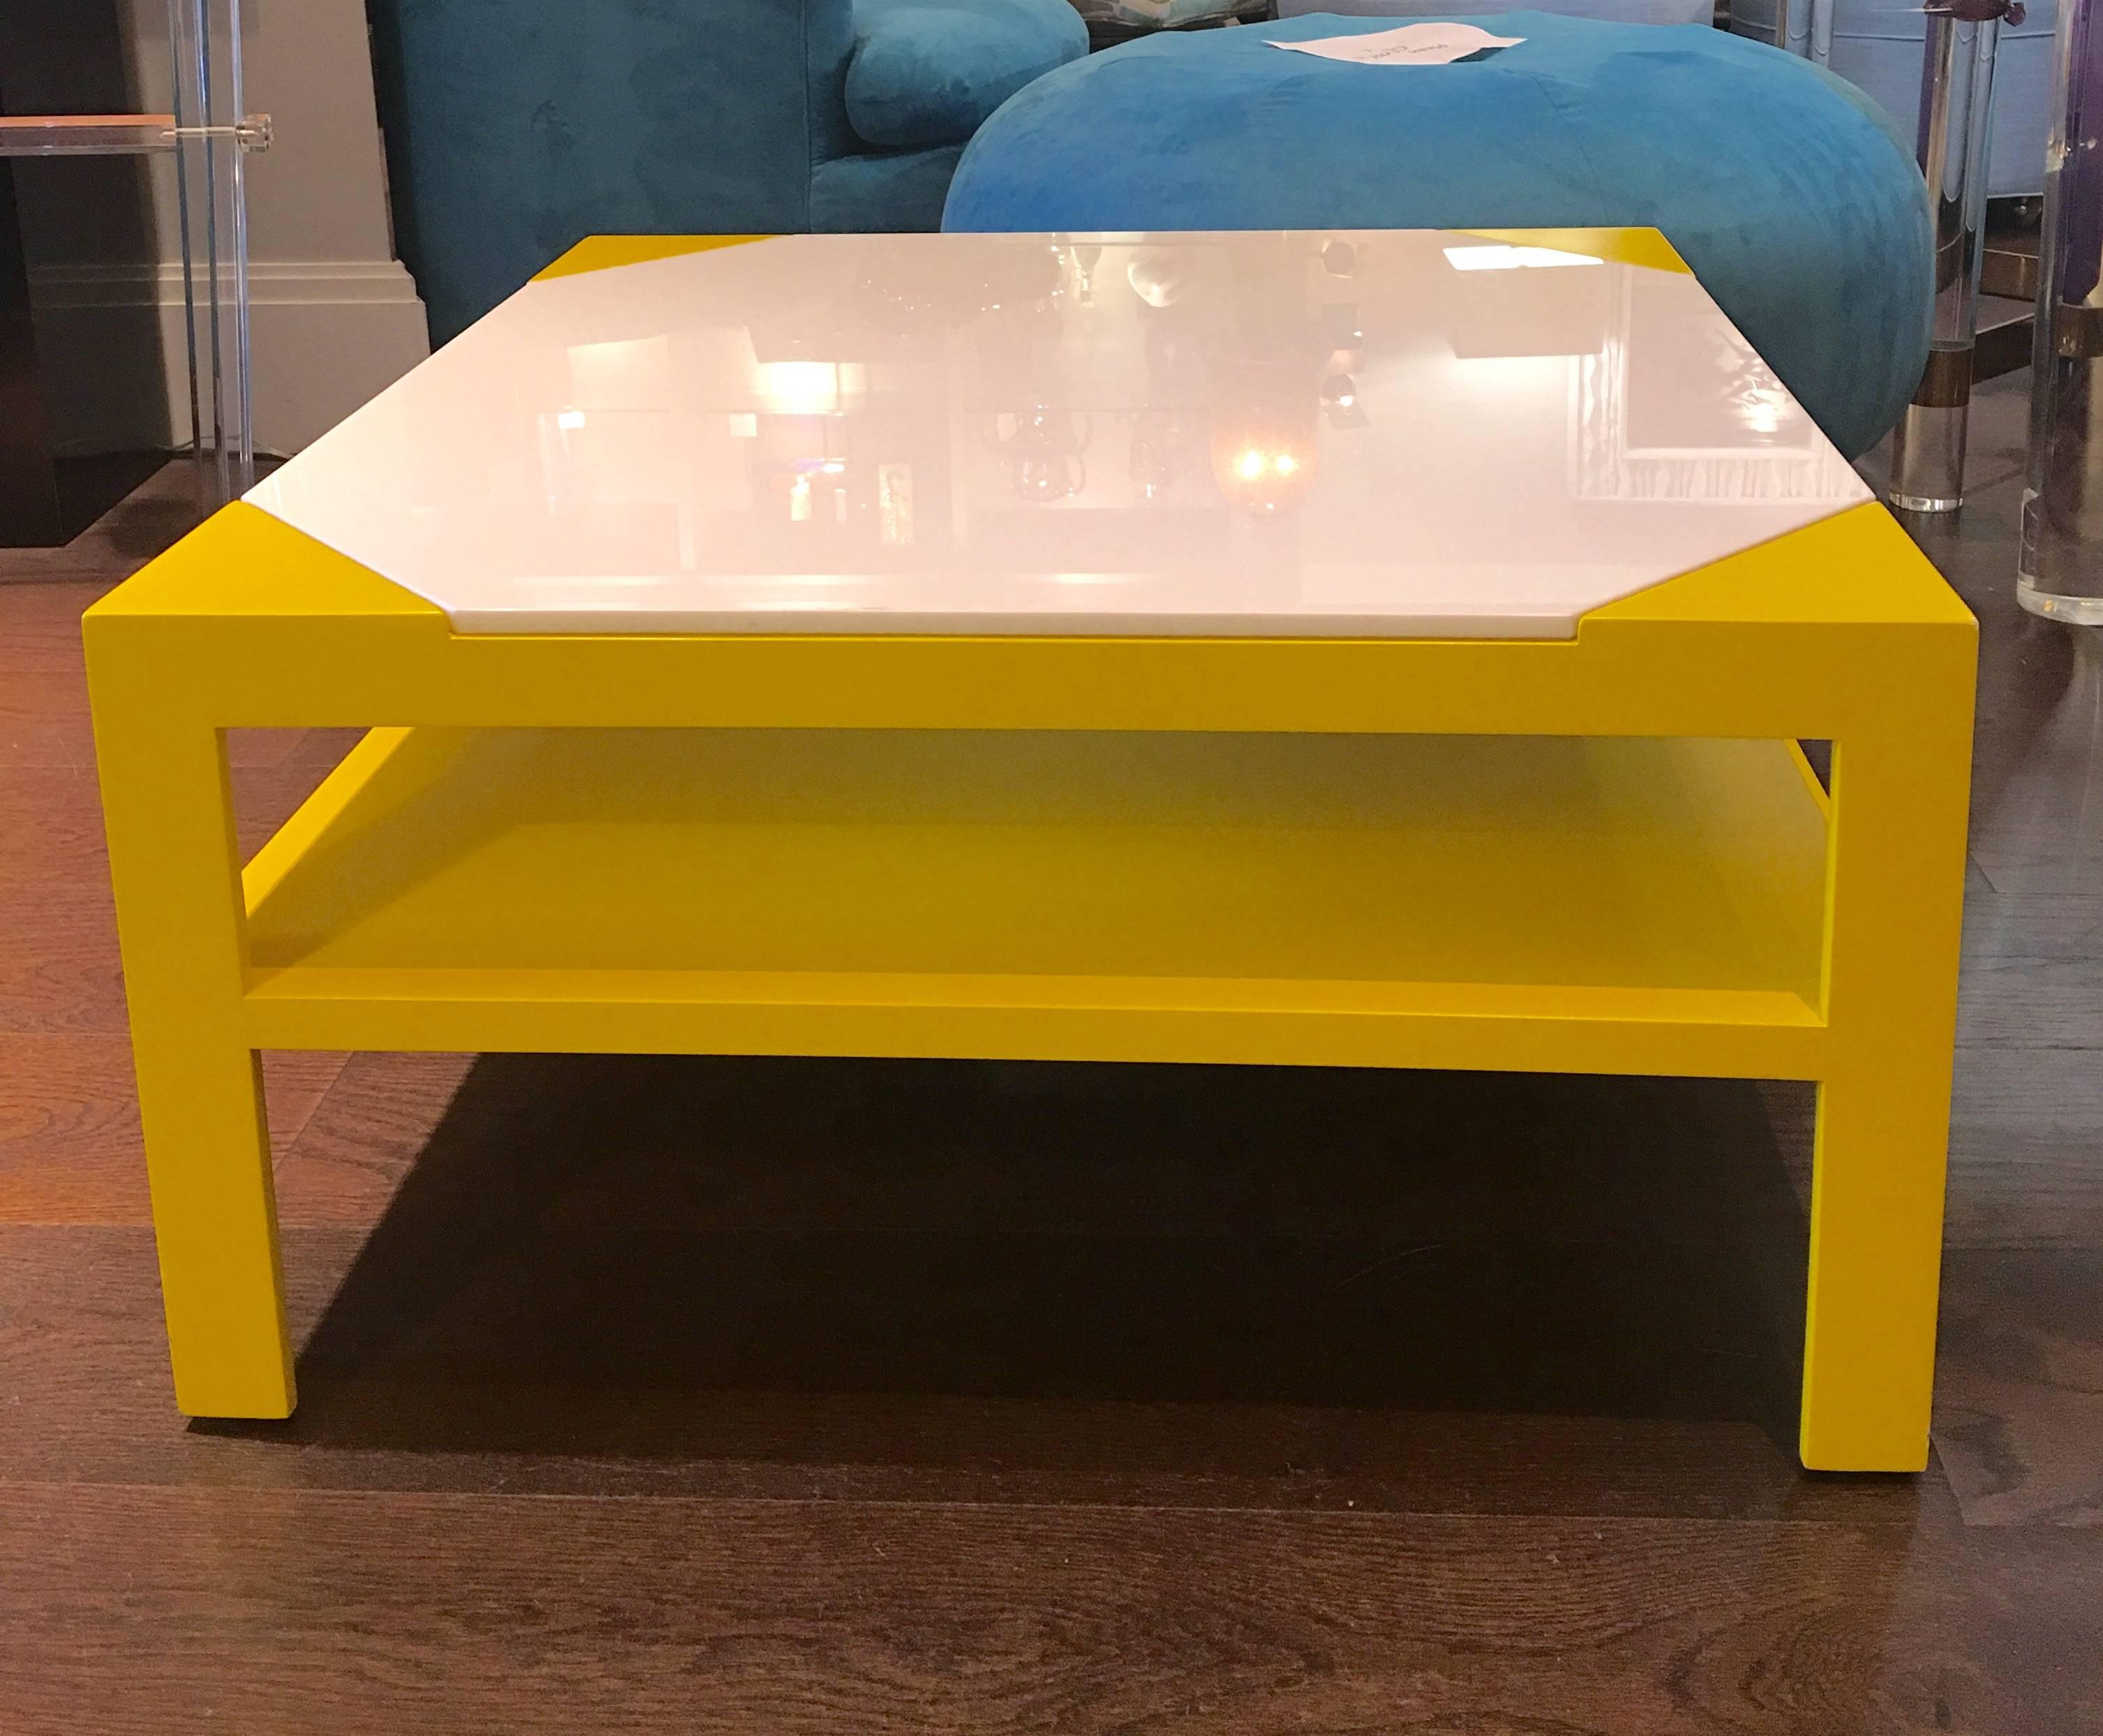 Fantastic yellow lacquered wood table with white glass top by Tommi Parzinger, circa 1970.